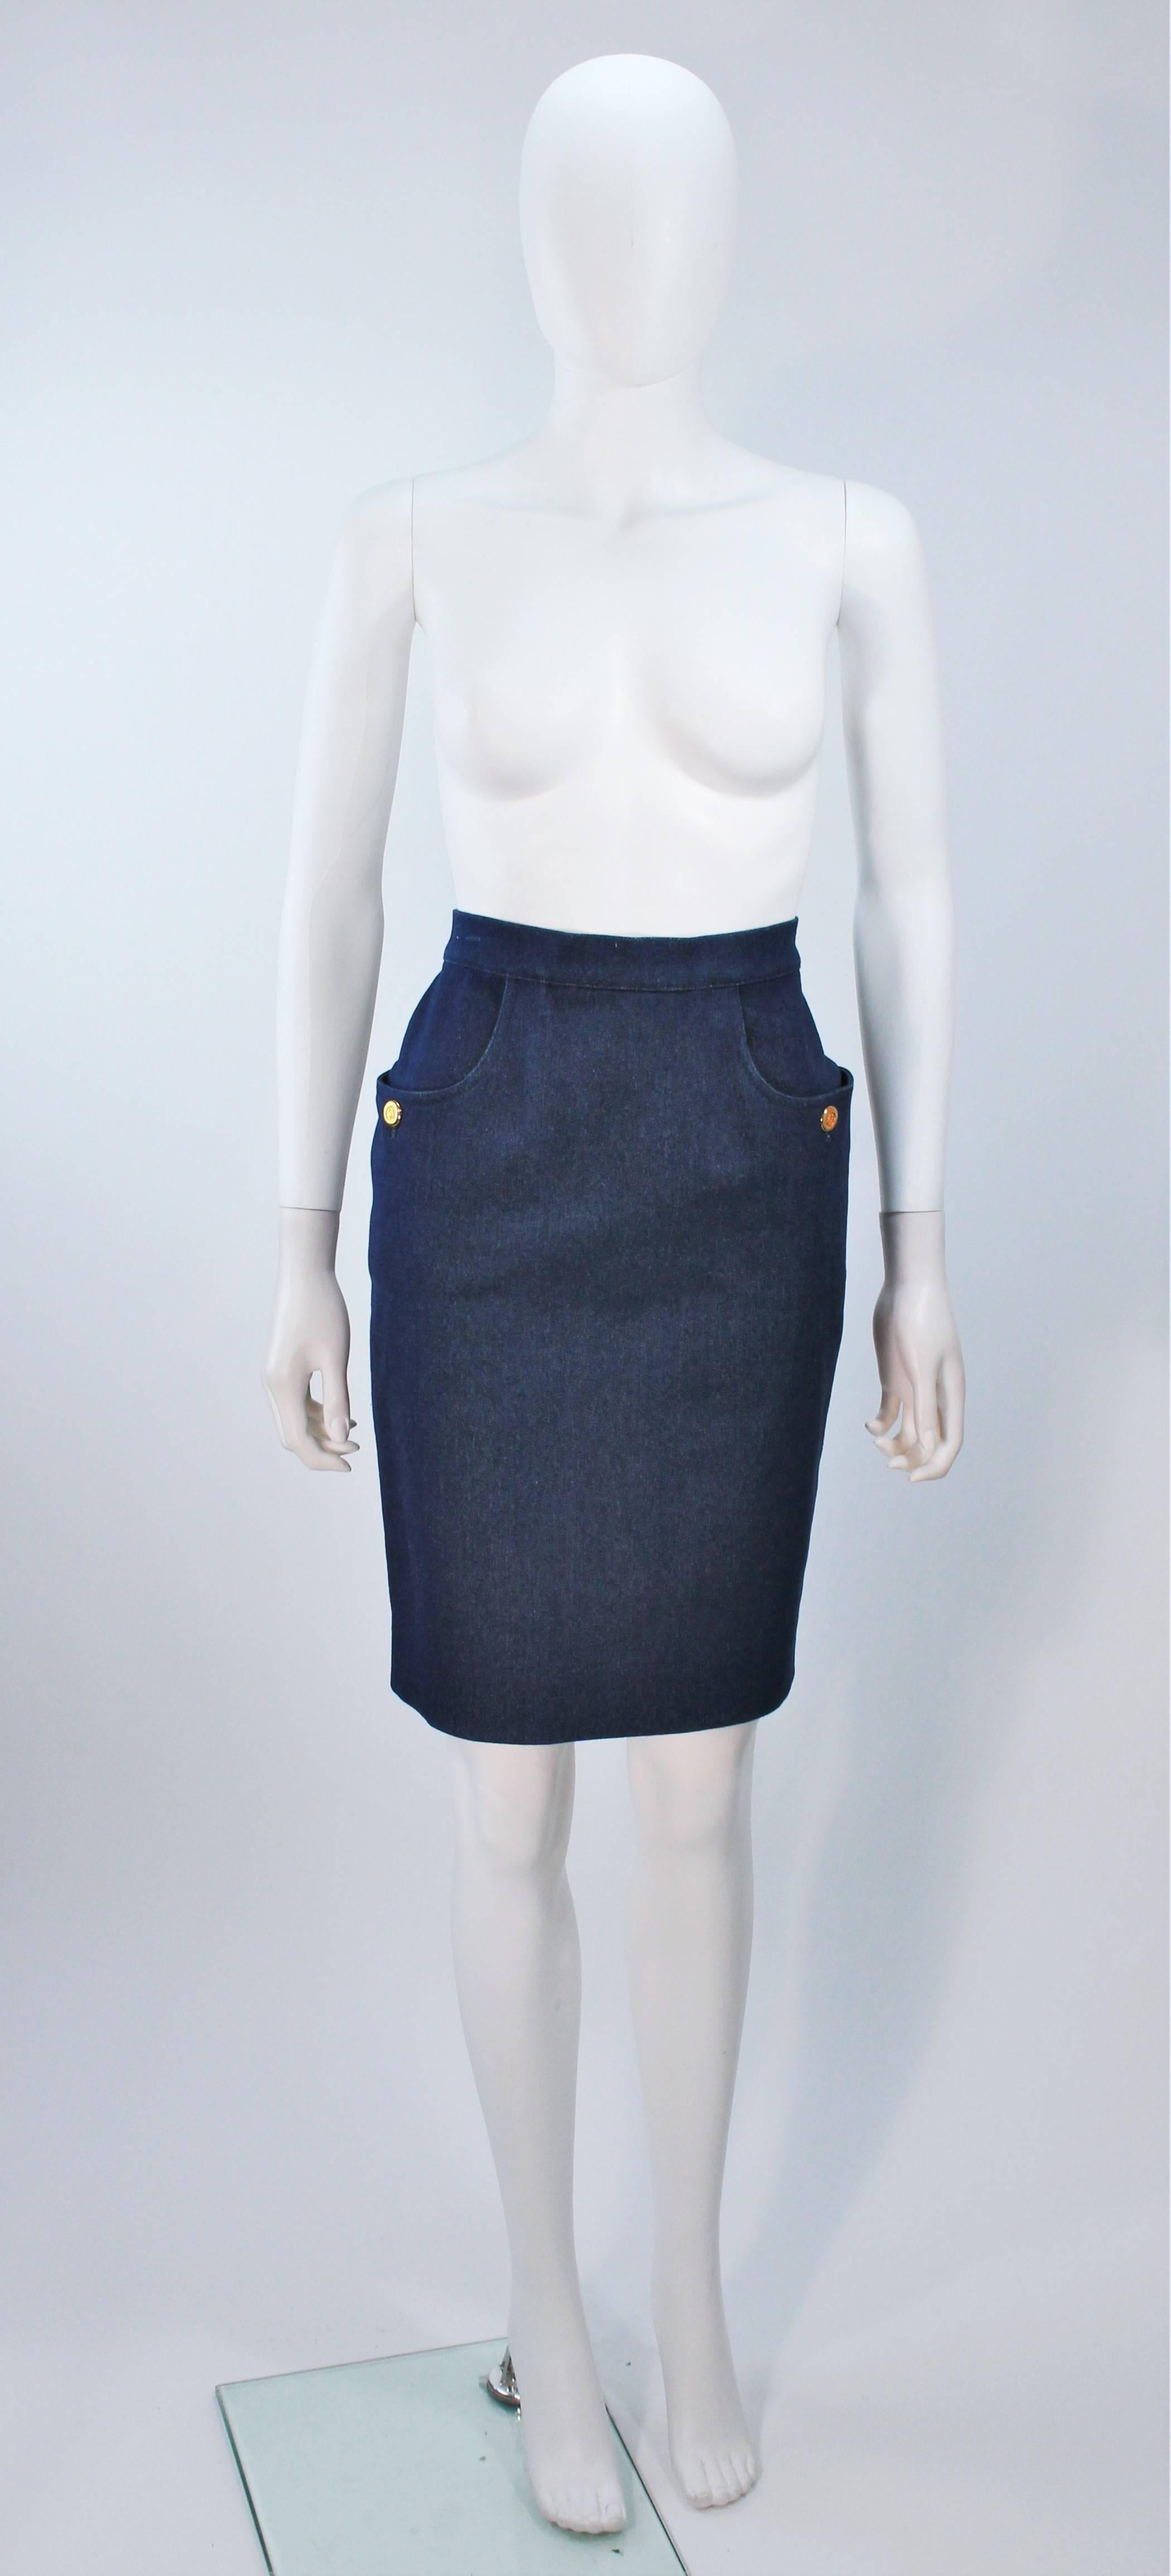  This Chanel skirt is composed of a blue heavy weight stretch denim. The classic pencil style skirt features a zipper closure, side pockets, and gold button accents. In excellent vintage condition. 

  **Please cross-reference measurements for